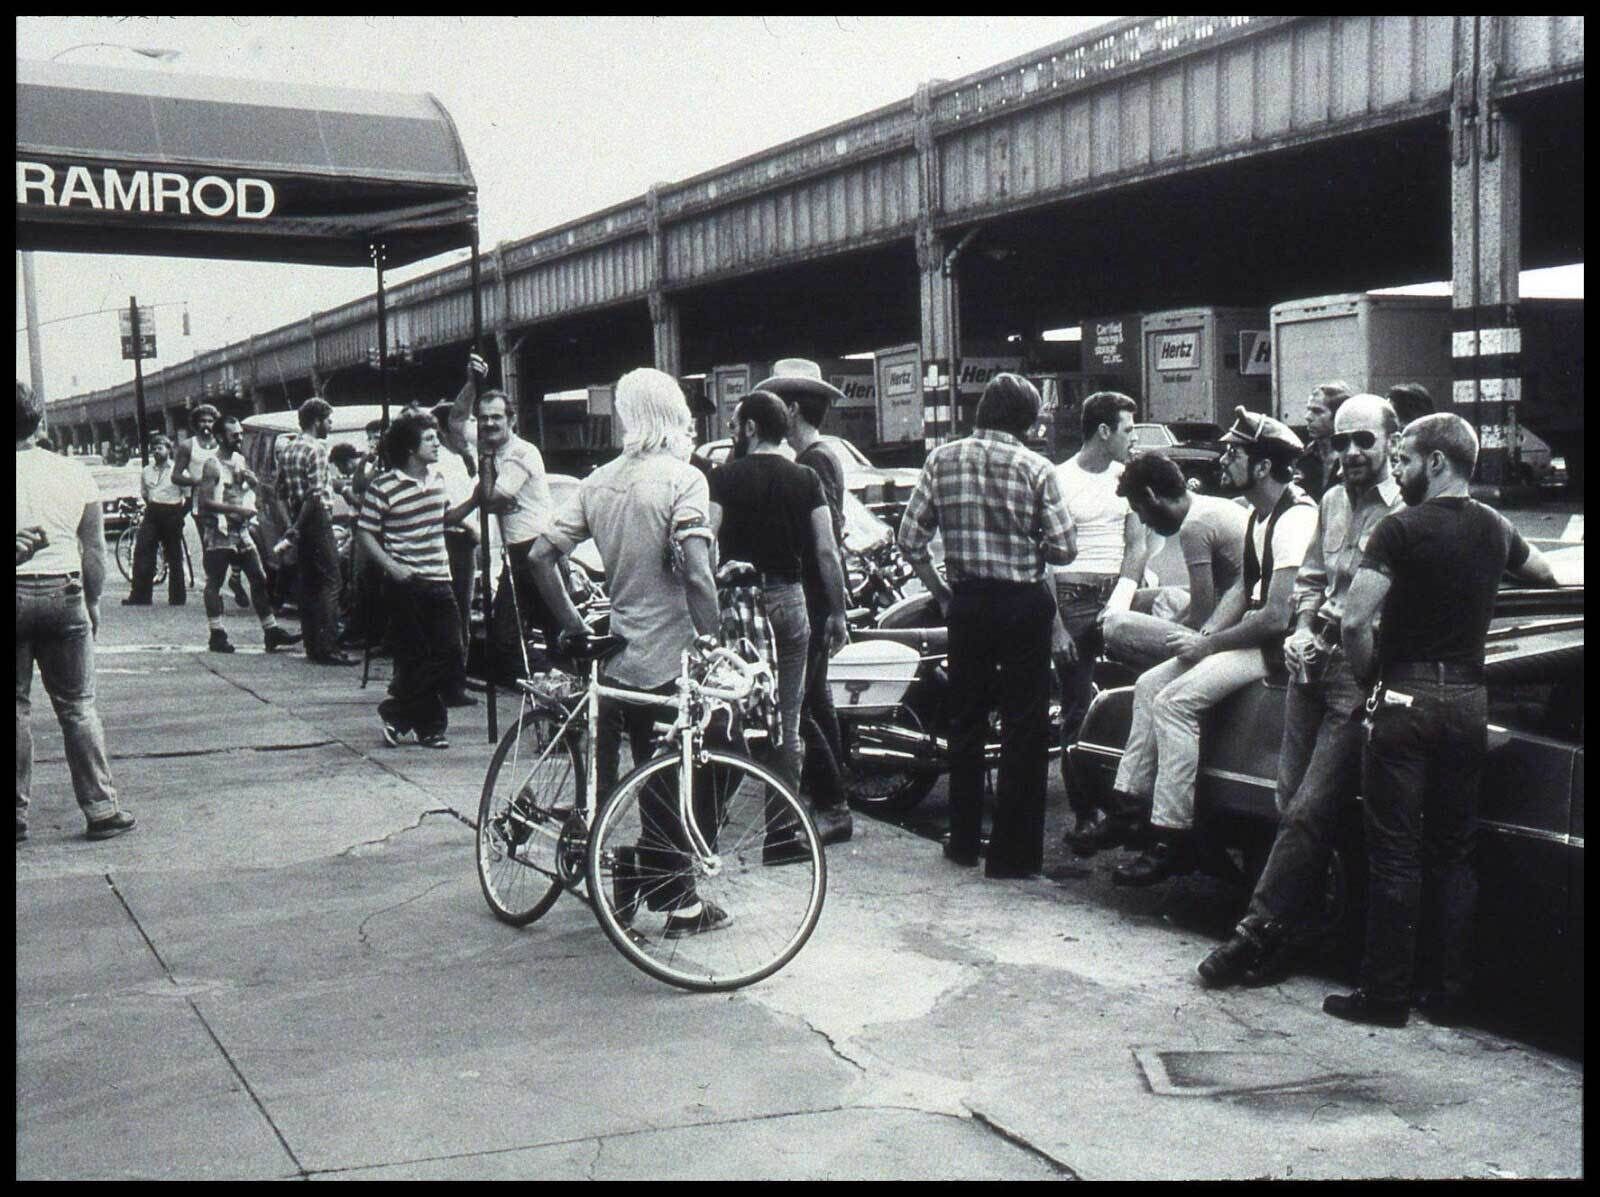 Black and White photograph of a crowd of men casually leaning against parked cars or bicycles across from an elevated train rack. Part of an awning with block letters reading "Ramrod" is visible on the left.